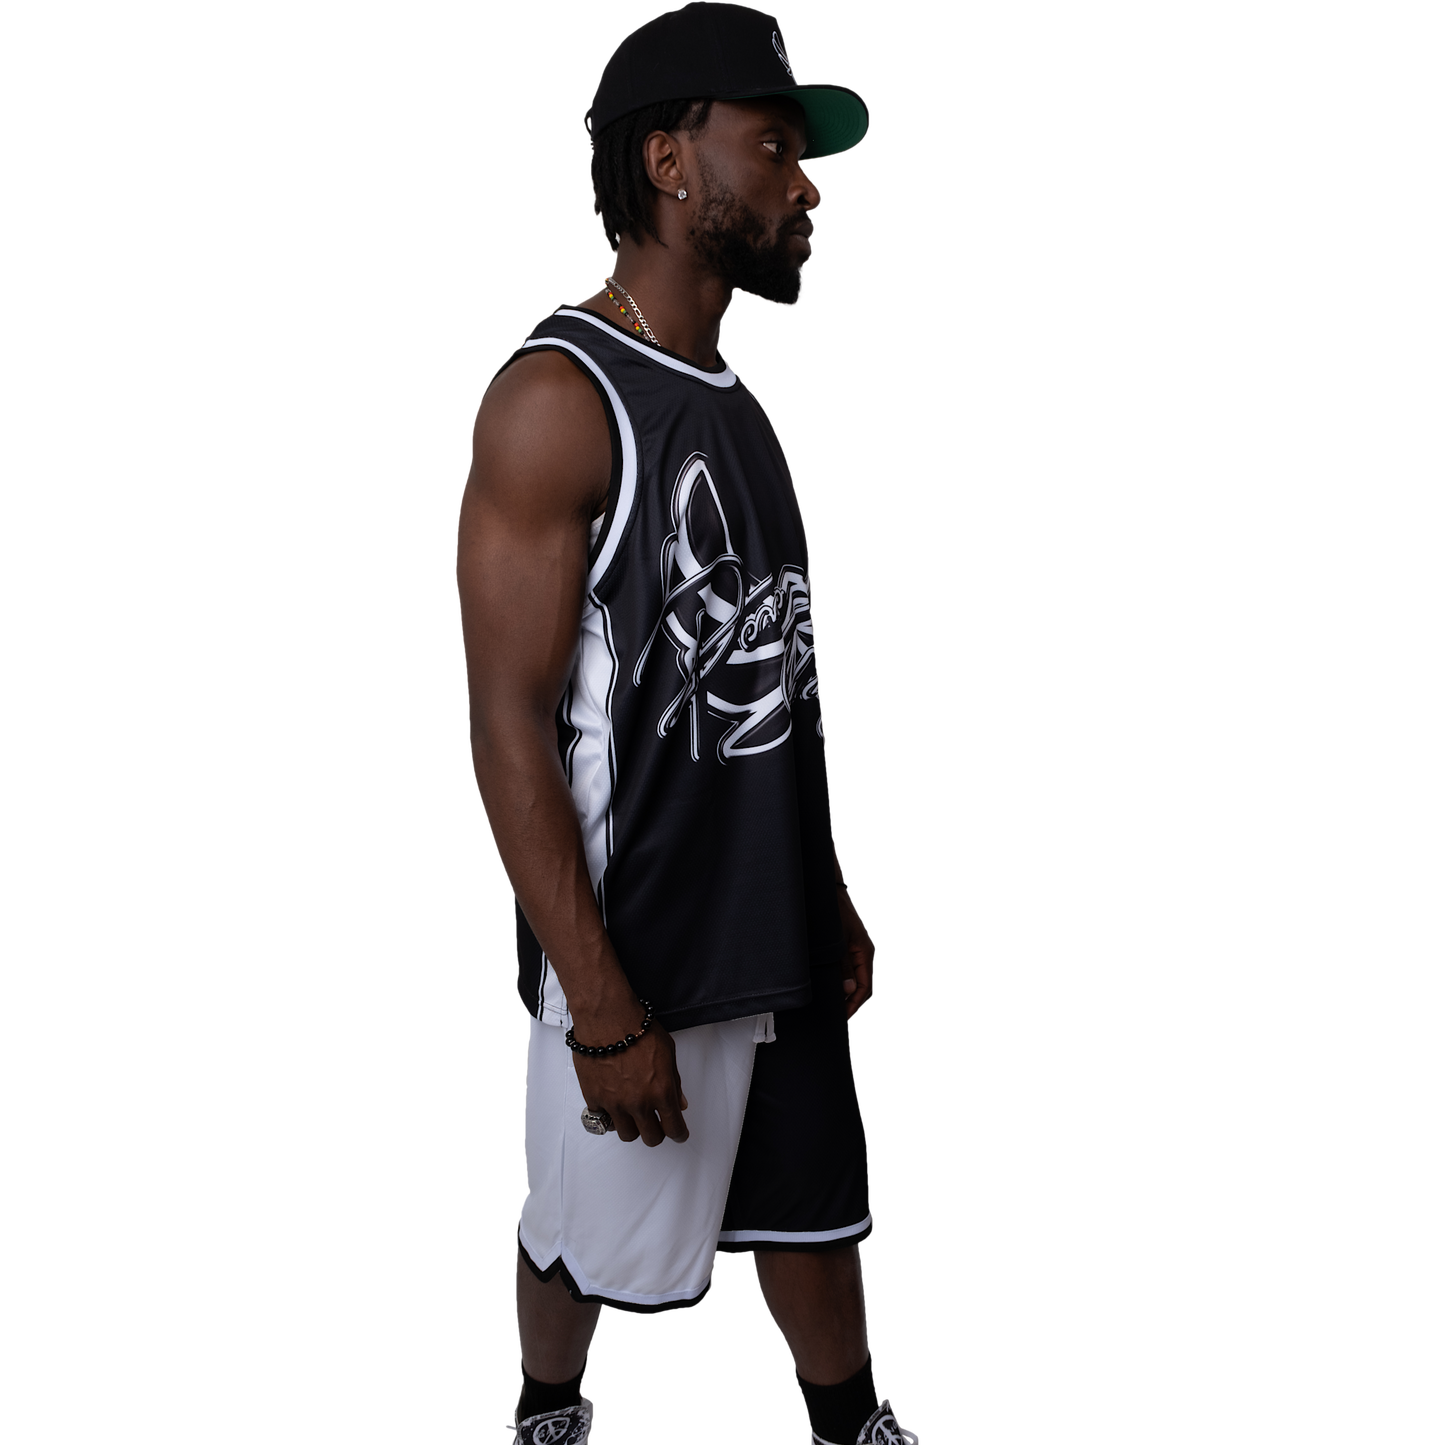 Black and White Basketball Jersey " BE CHANGE "-PEACE GANG in canada